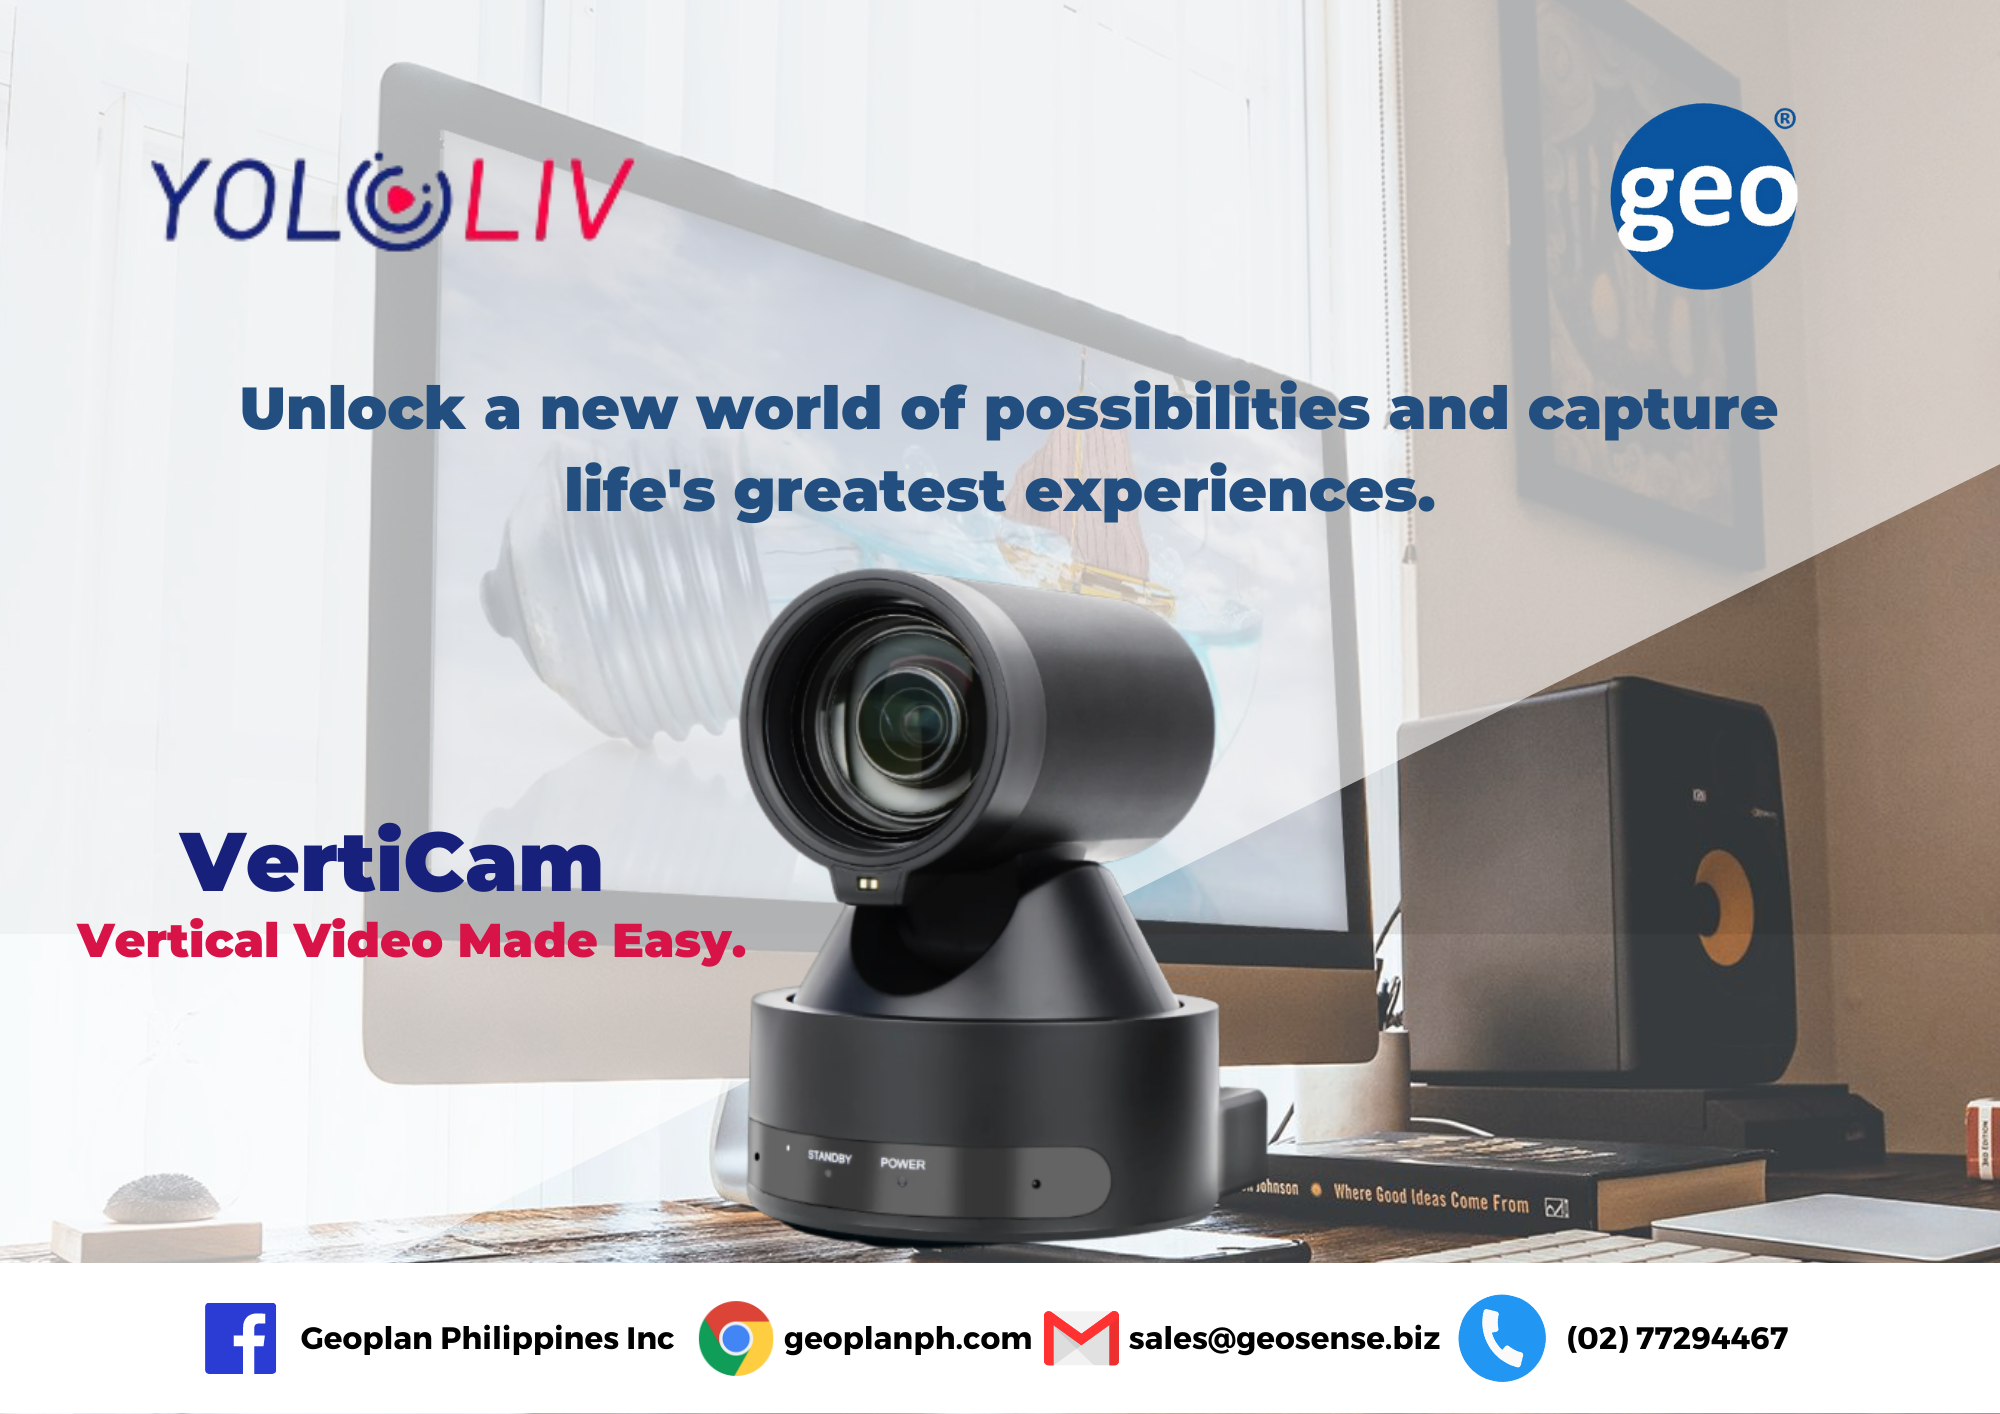 YoloLiv: Unlock a New World of Possibilities and Capture Life’s Greatest Experiences with this Live Streaming Camera.